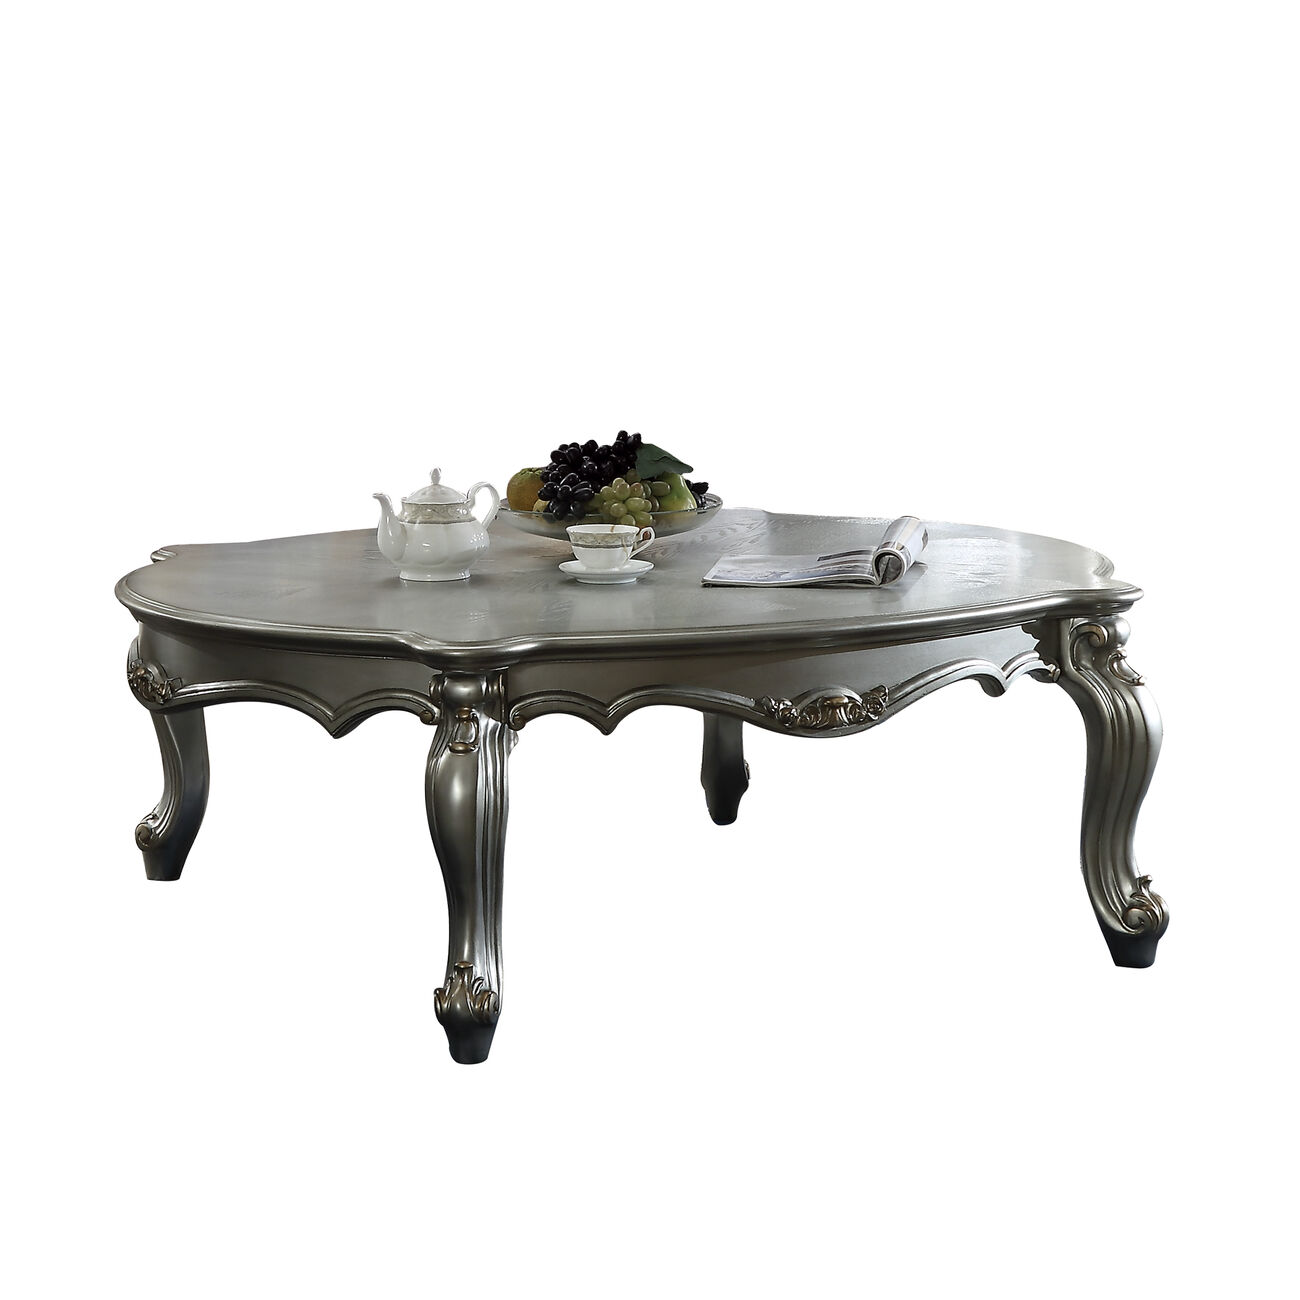 Oval Shaped Wooden Coffee Table with Cabriole Leg Support, Silver